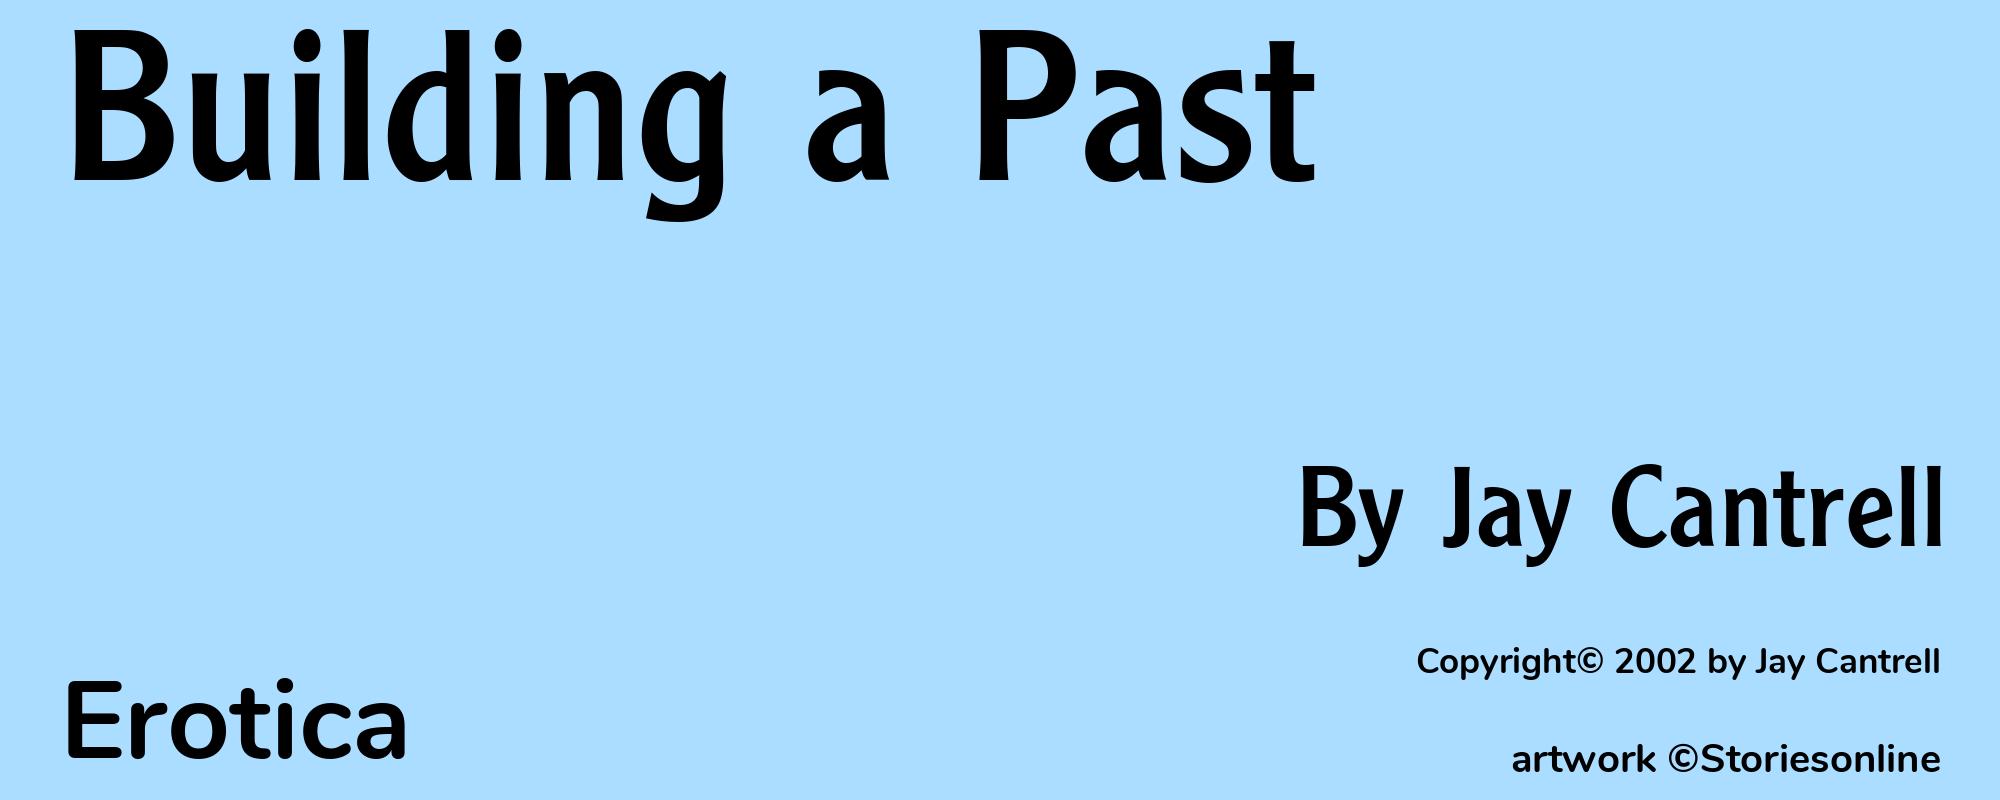 Building a Past - Cover